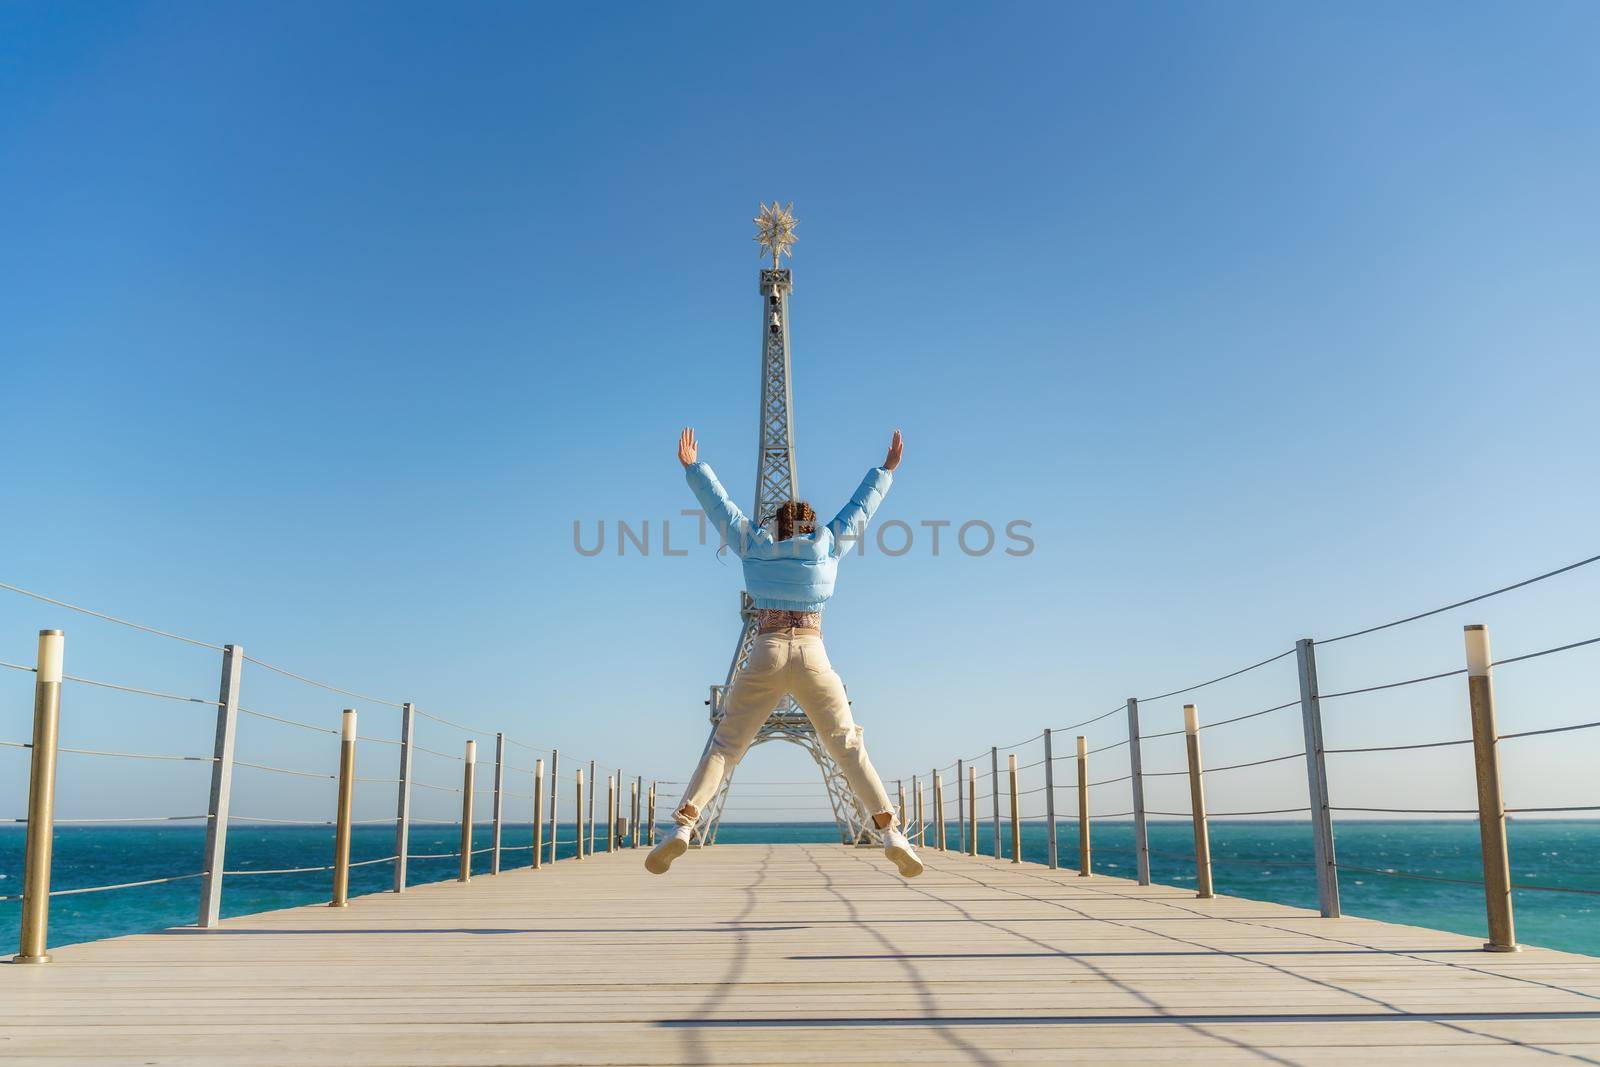 Large model of the Eiffel Tower on the beach. A woman walks along the pier towards the tower, wearing a blue jacket and white jeans. by Matiunina